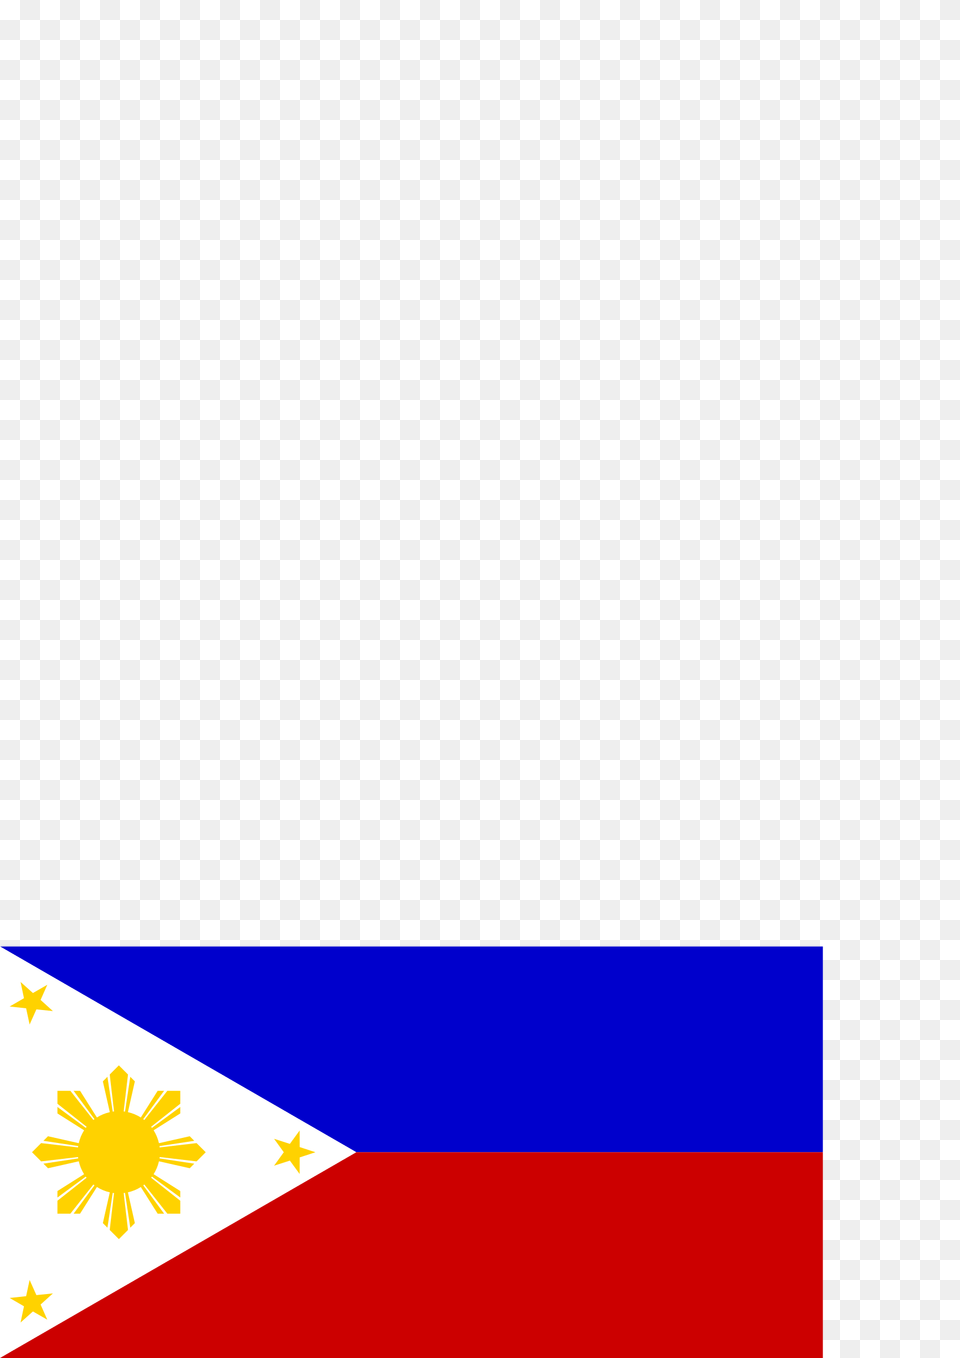 The Philippine Flag Icons, Philippines Flag Png Image